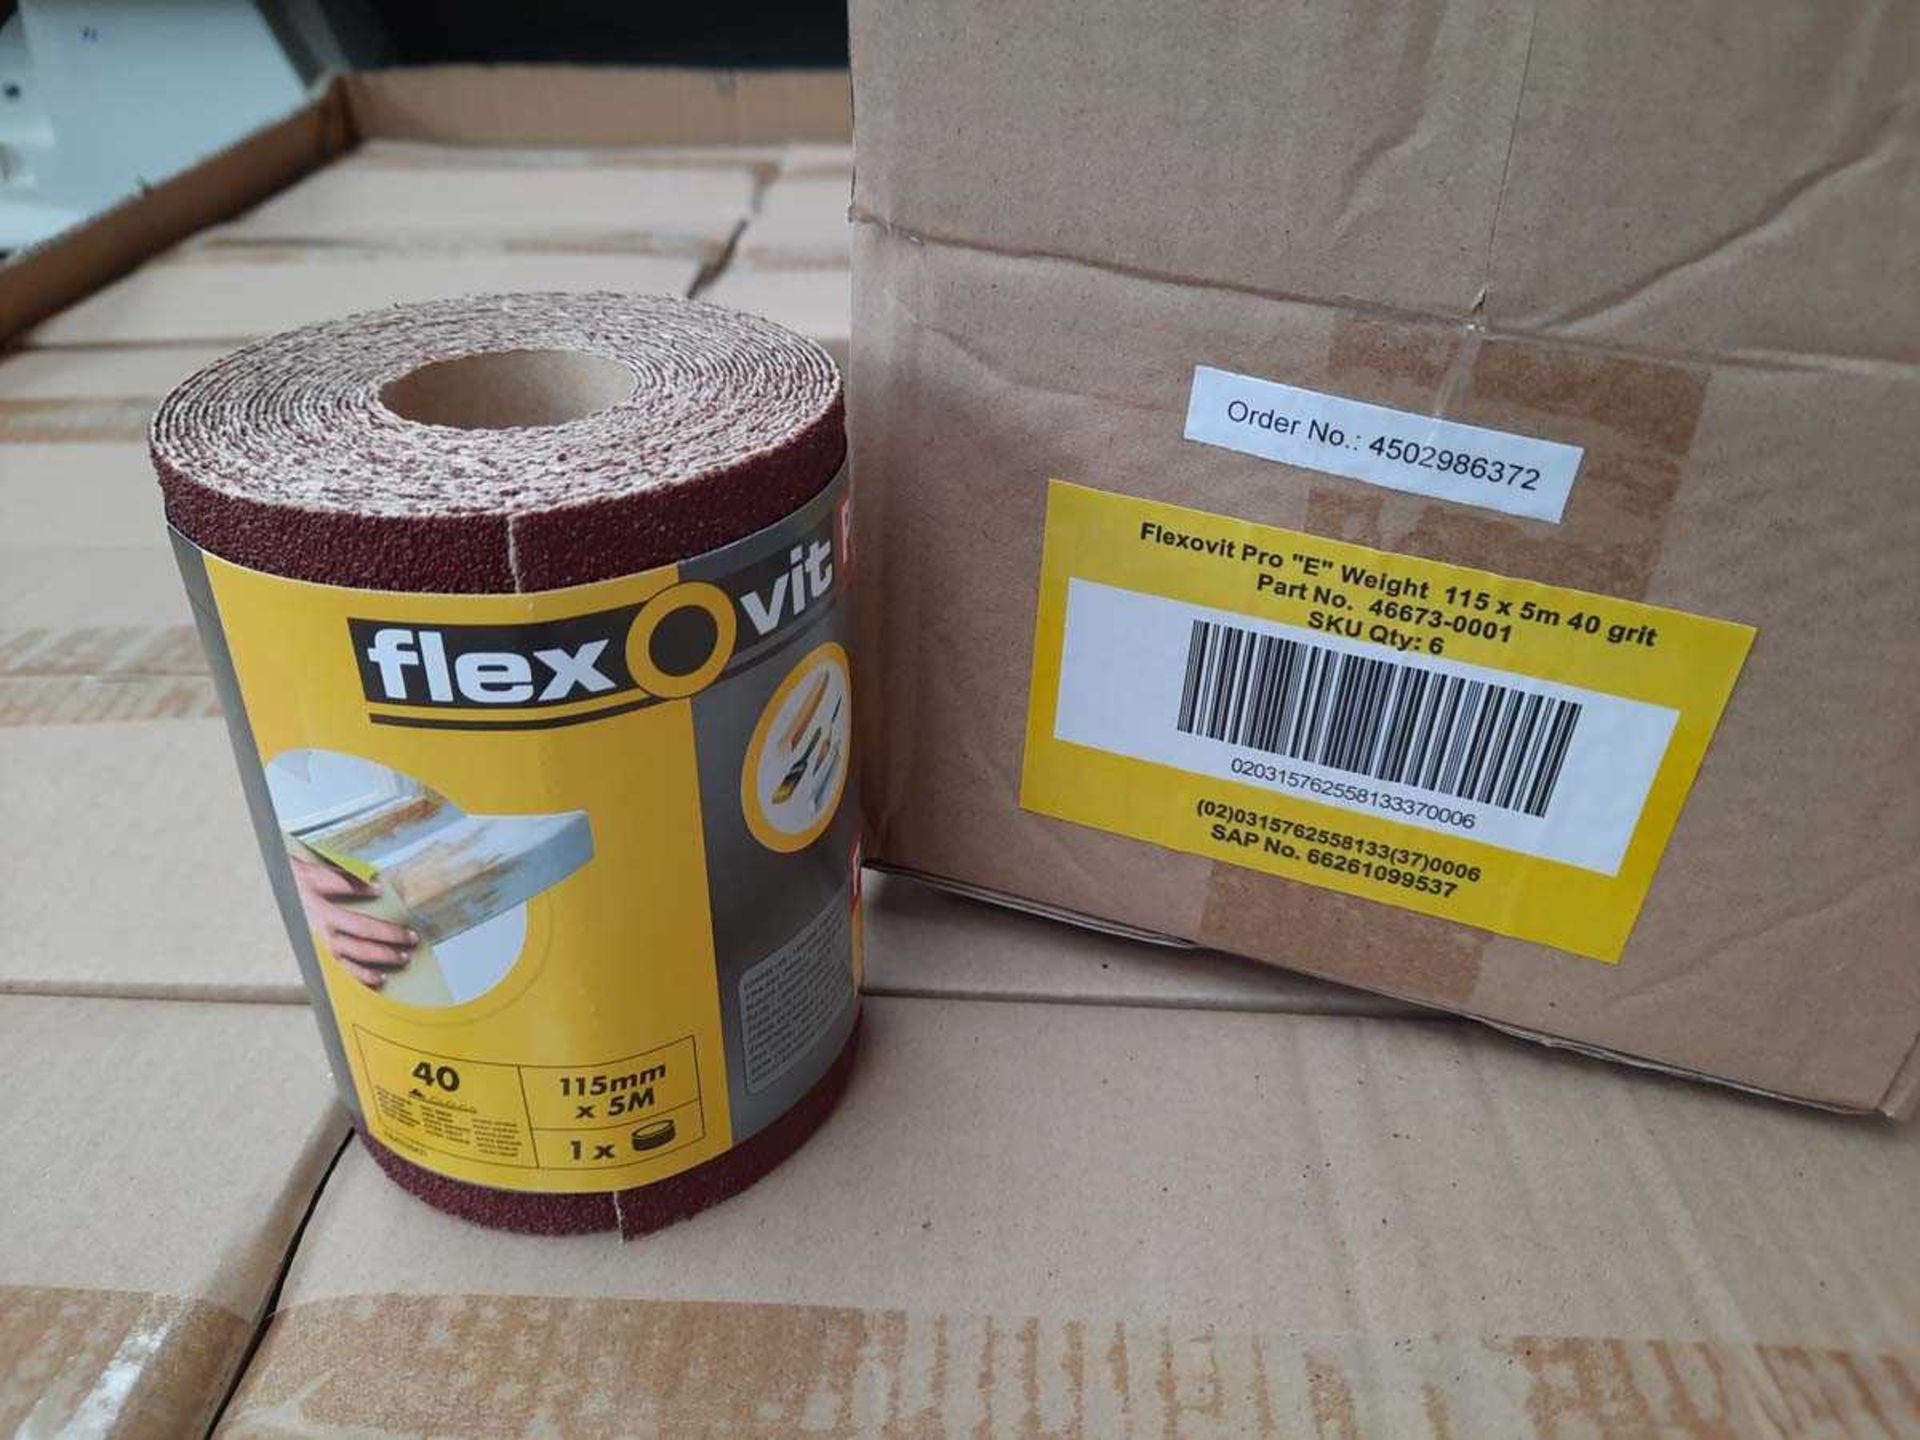 +VAT 10 boxes of Flex O Vit 6 x pack 5m roll of 40 grit sand paper (approx 60 rolls in total)